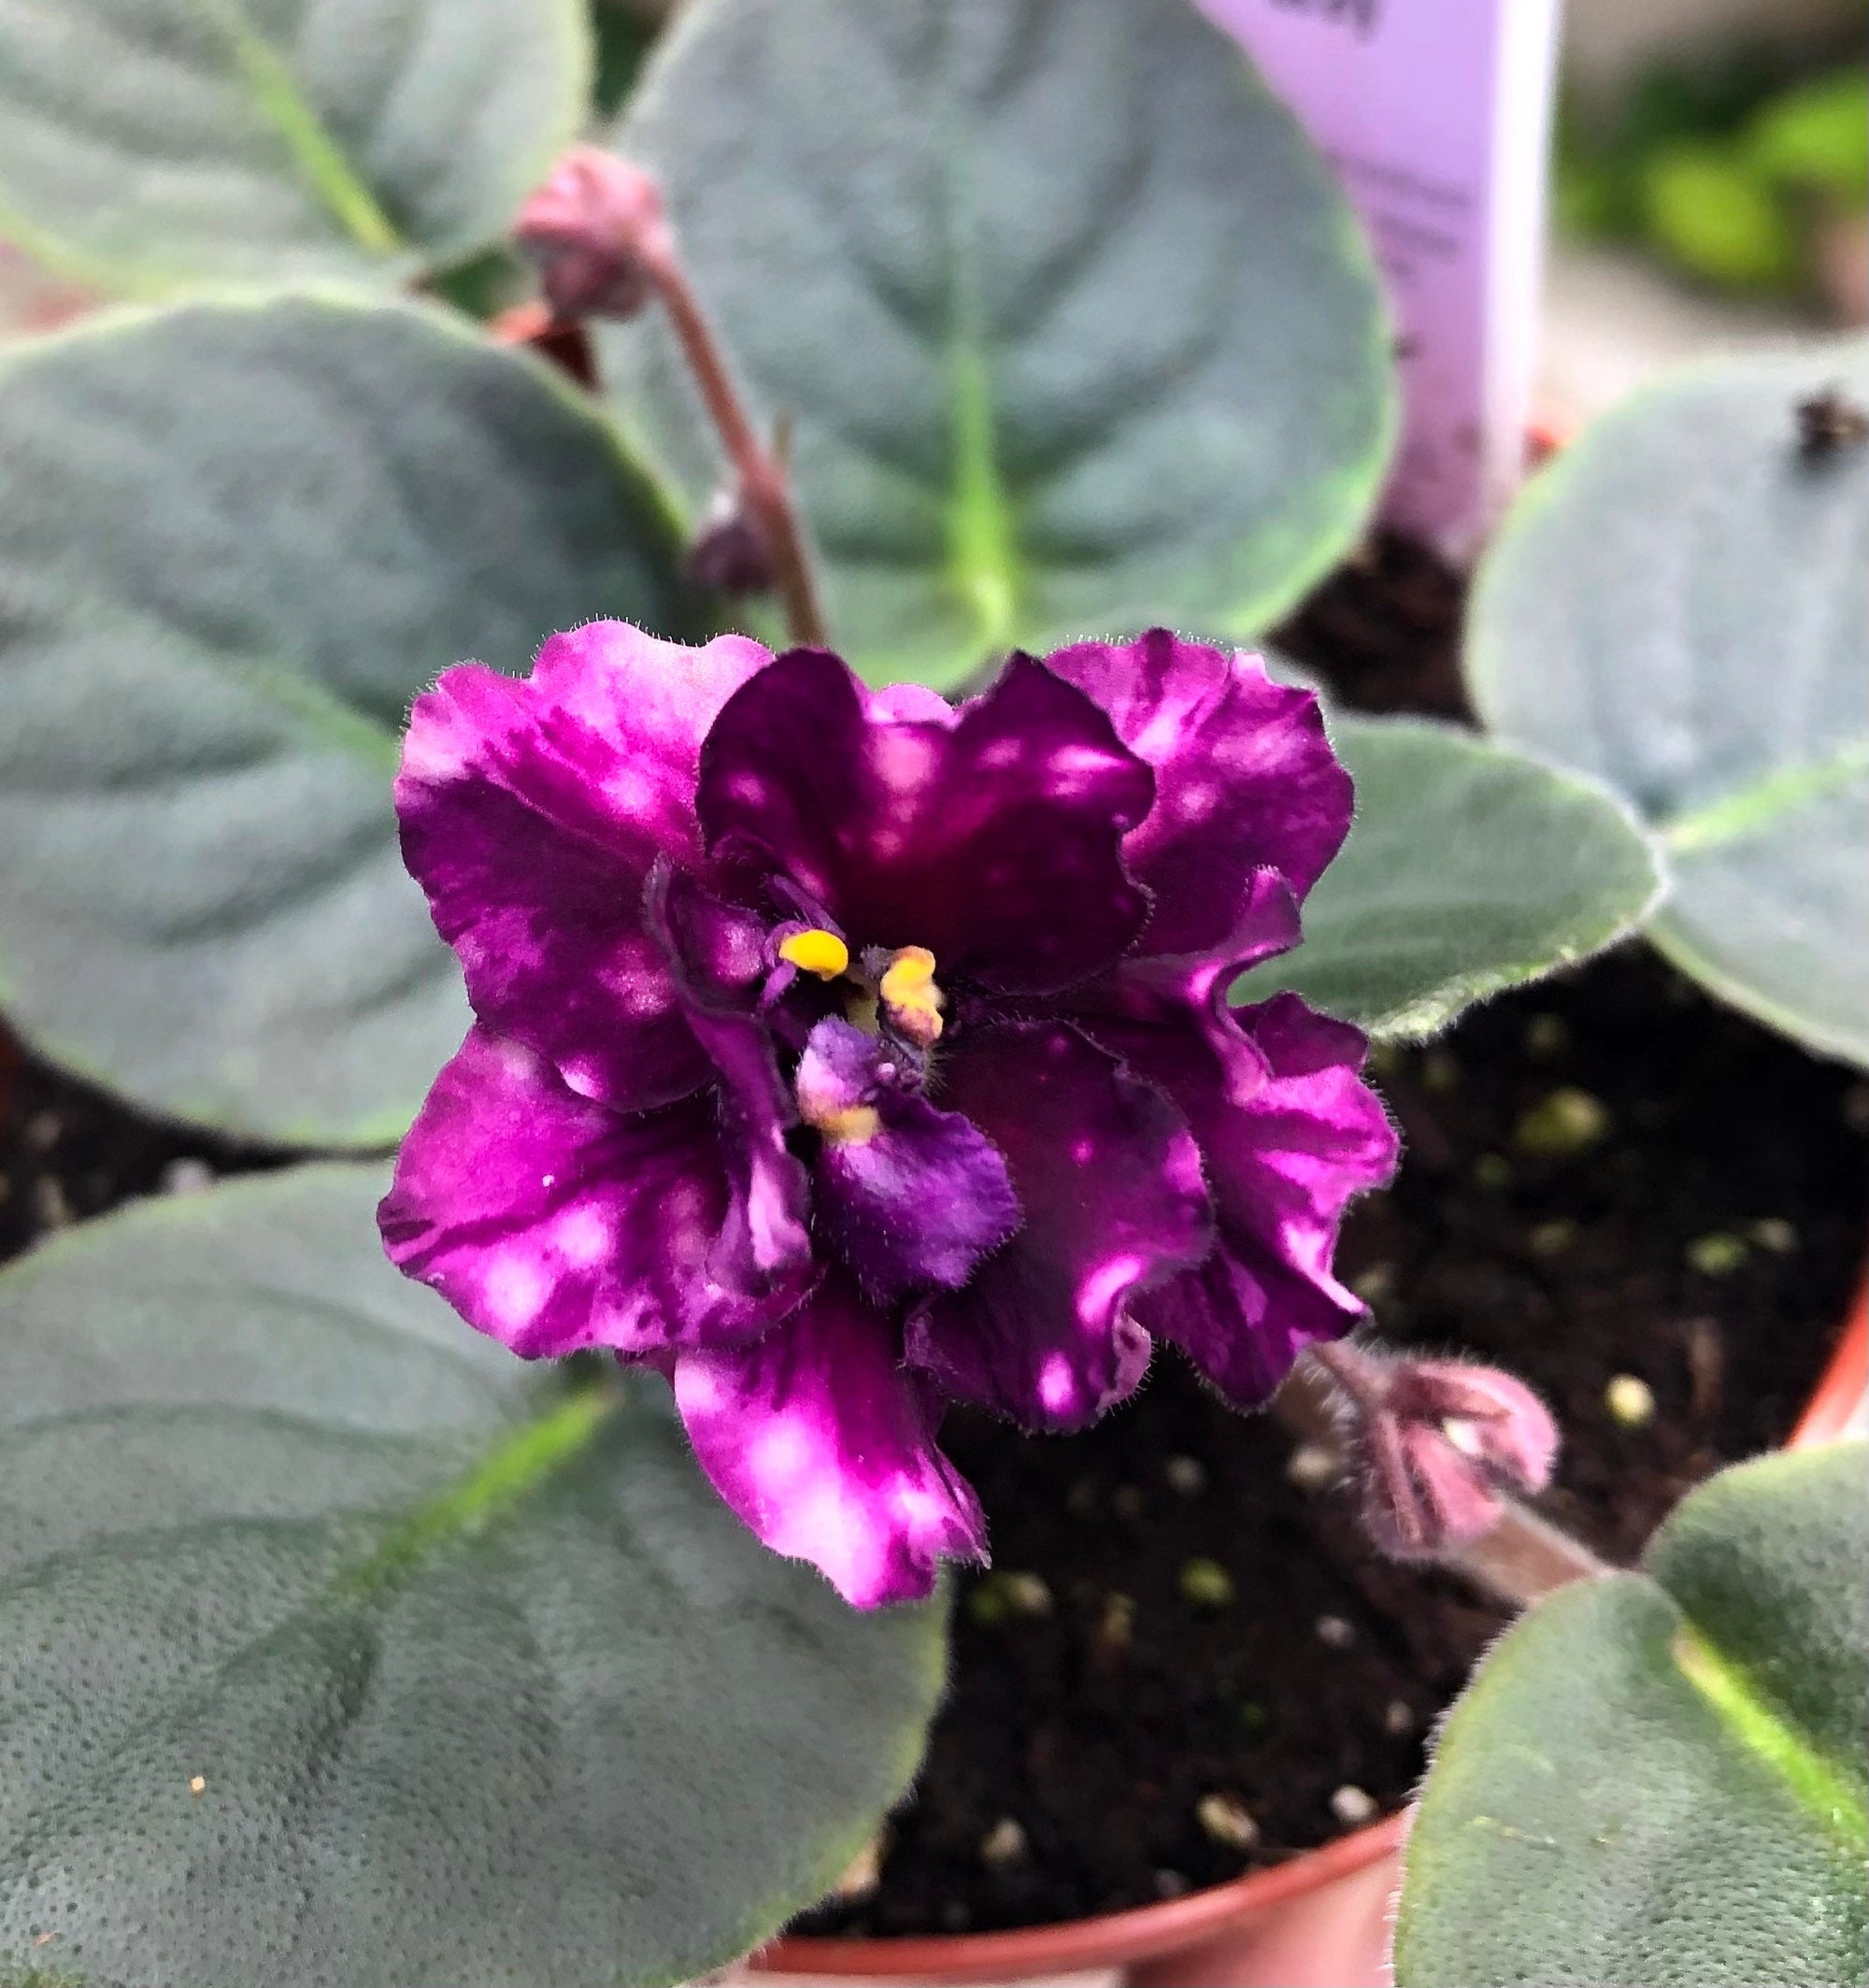 Live house plant variegated bloom African Violet Harmony’s ‘AE Milky Way’ garden 4” flower Potted gift